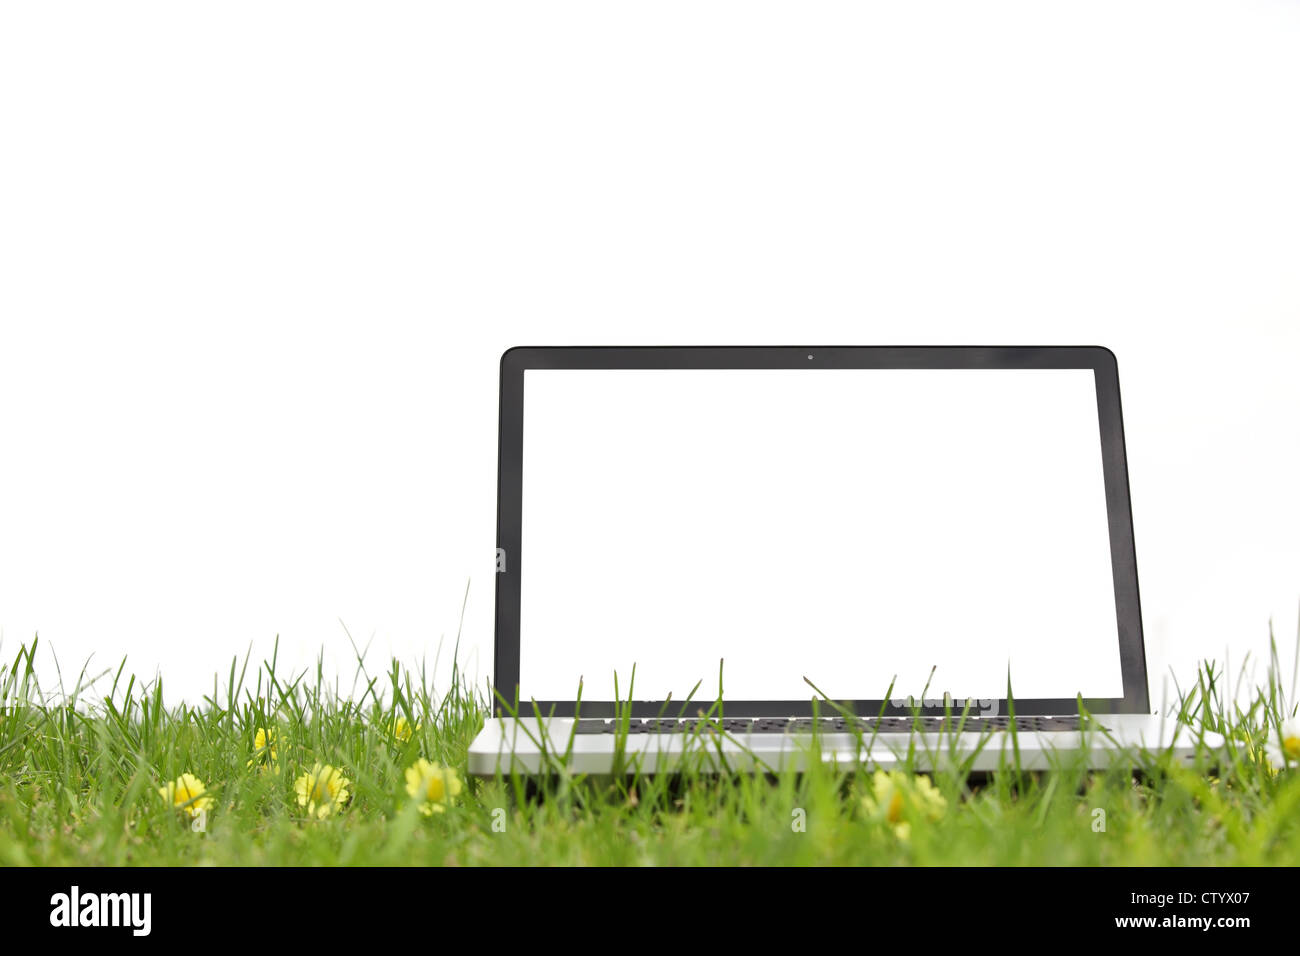 Laptop on grass,isolated on white background. Stock Photo